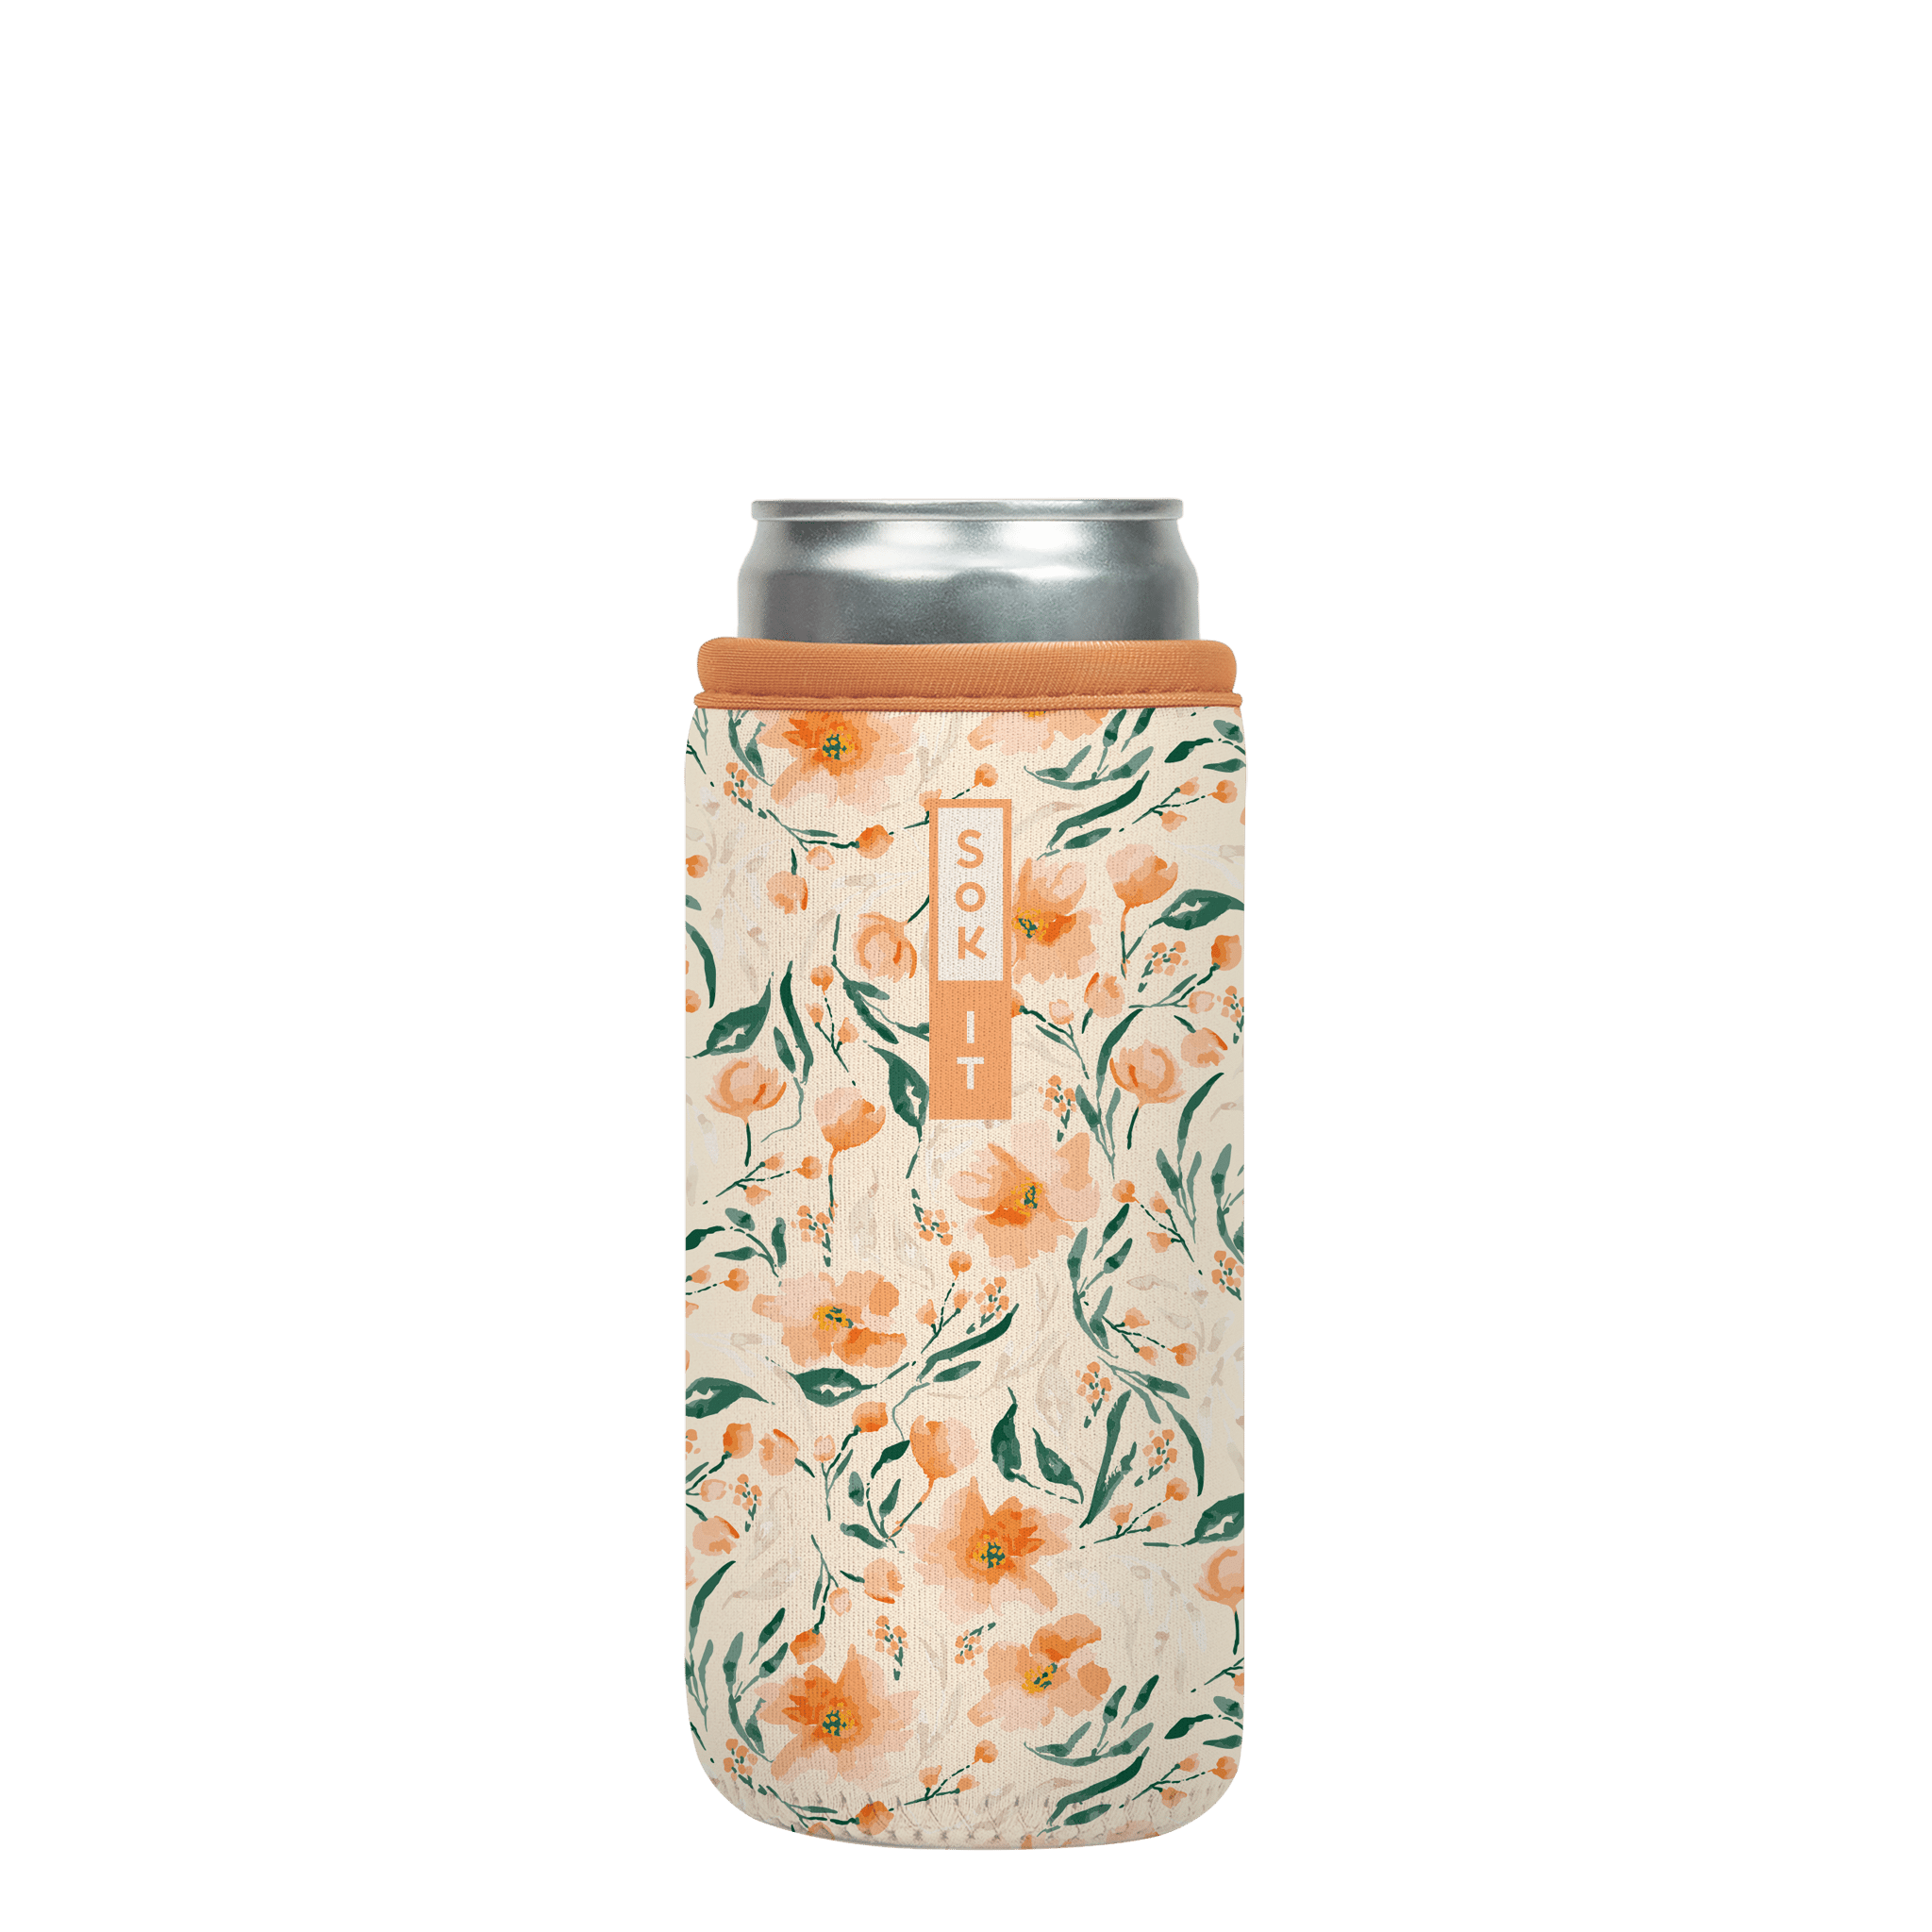 CanSok-Floral Blush Blossoms 12oz Slim Can